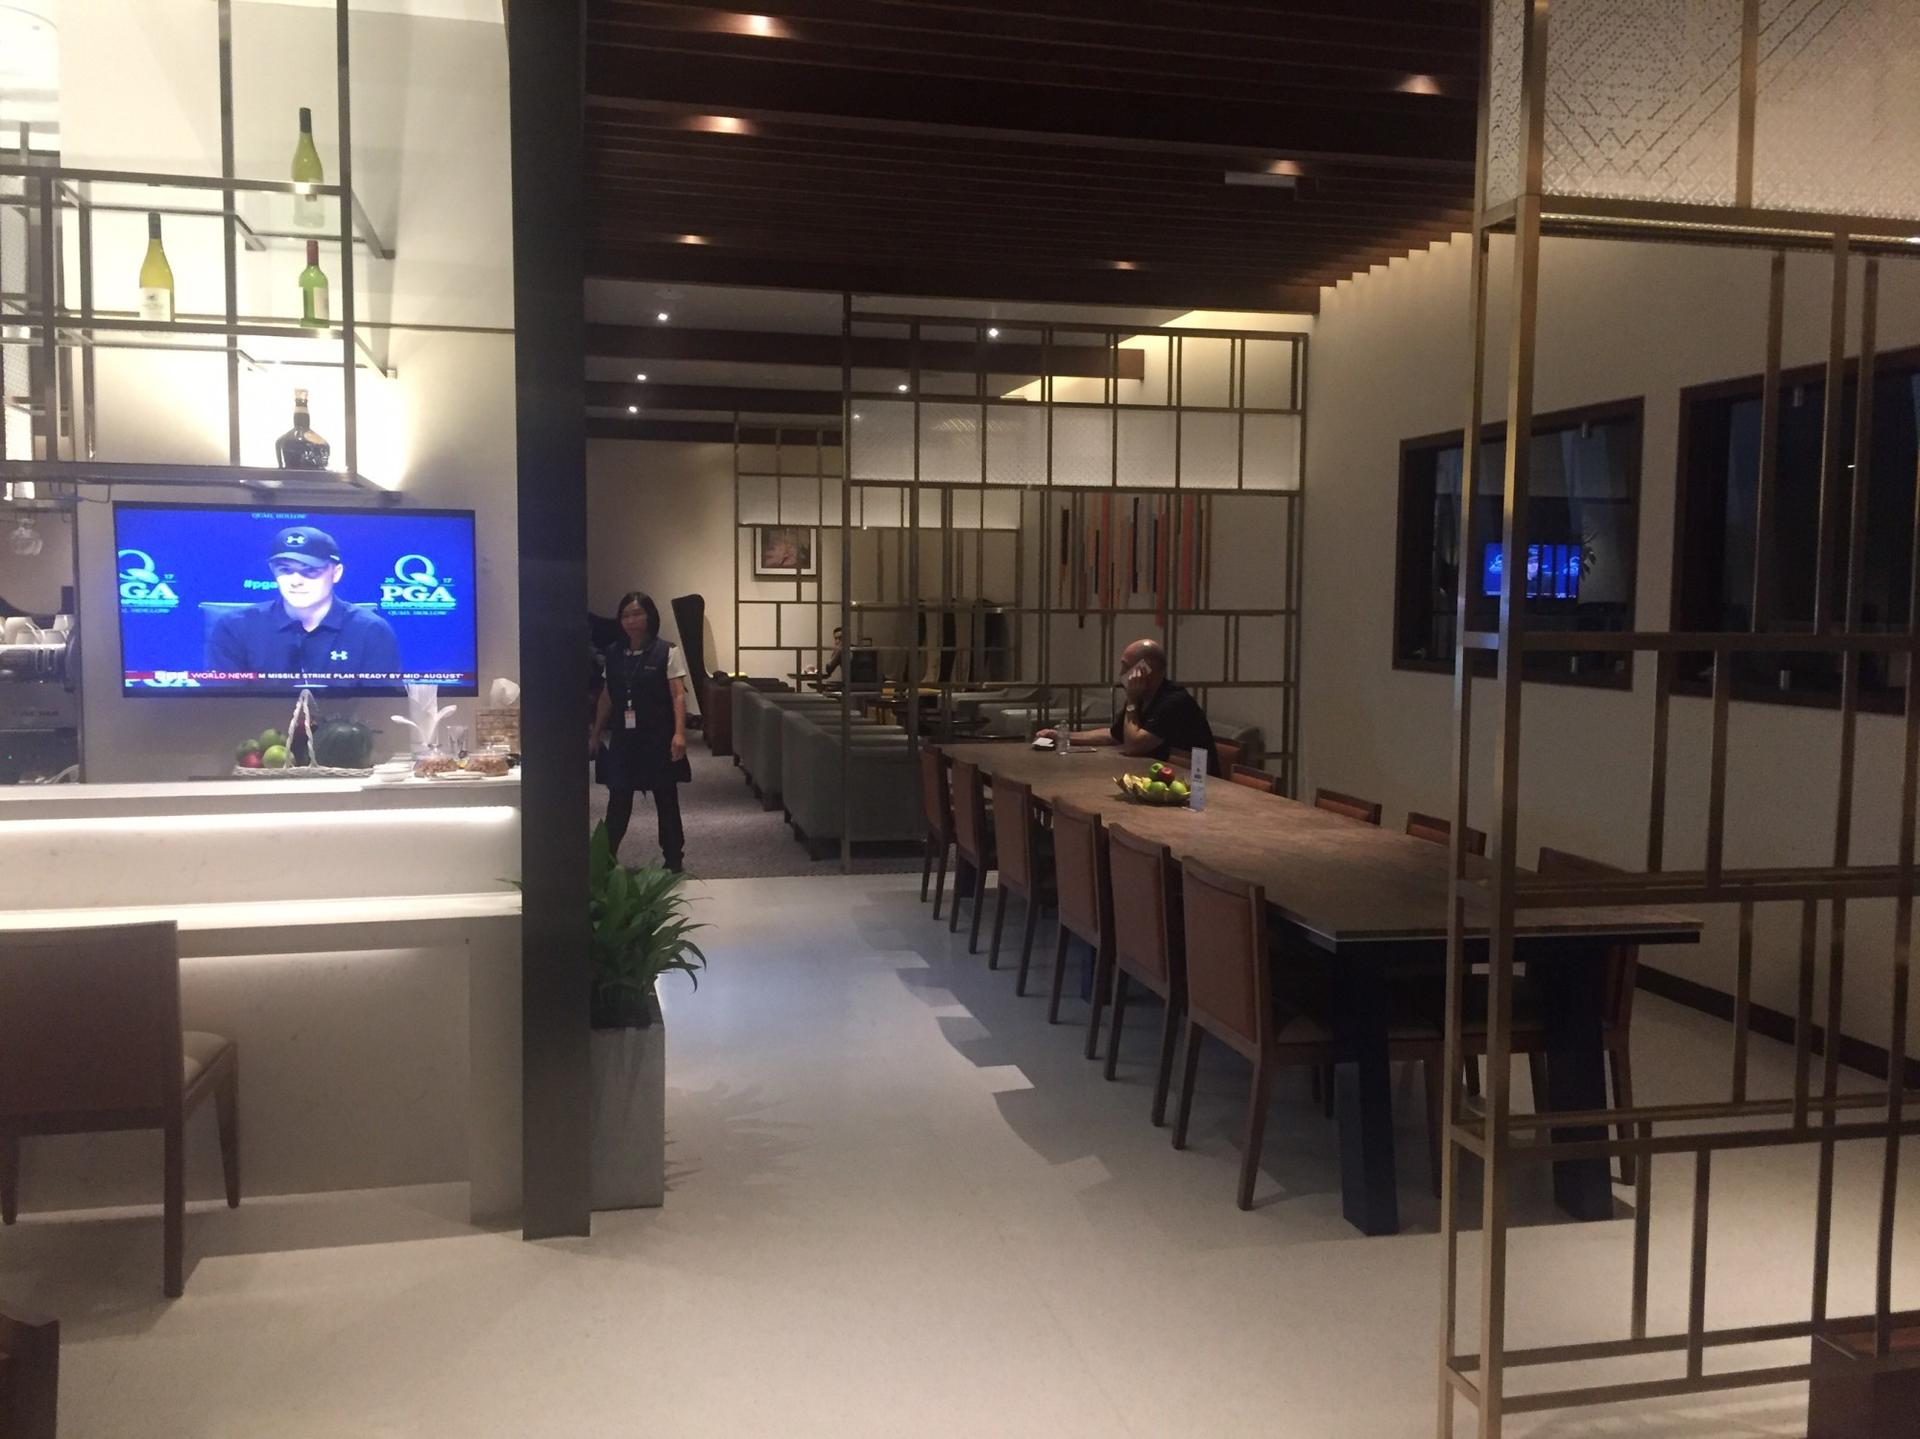 Singapore Airlines SilverKris Business Class Lounge  image 4 of 16